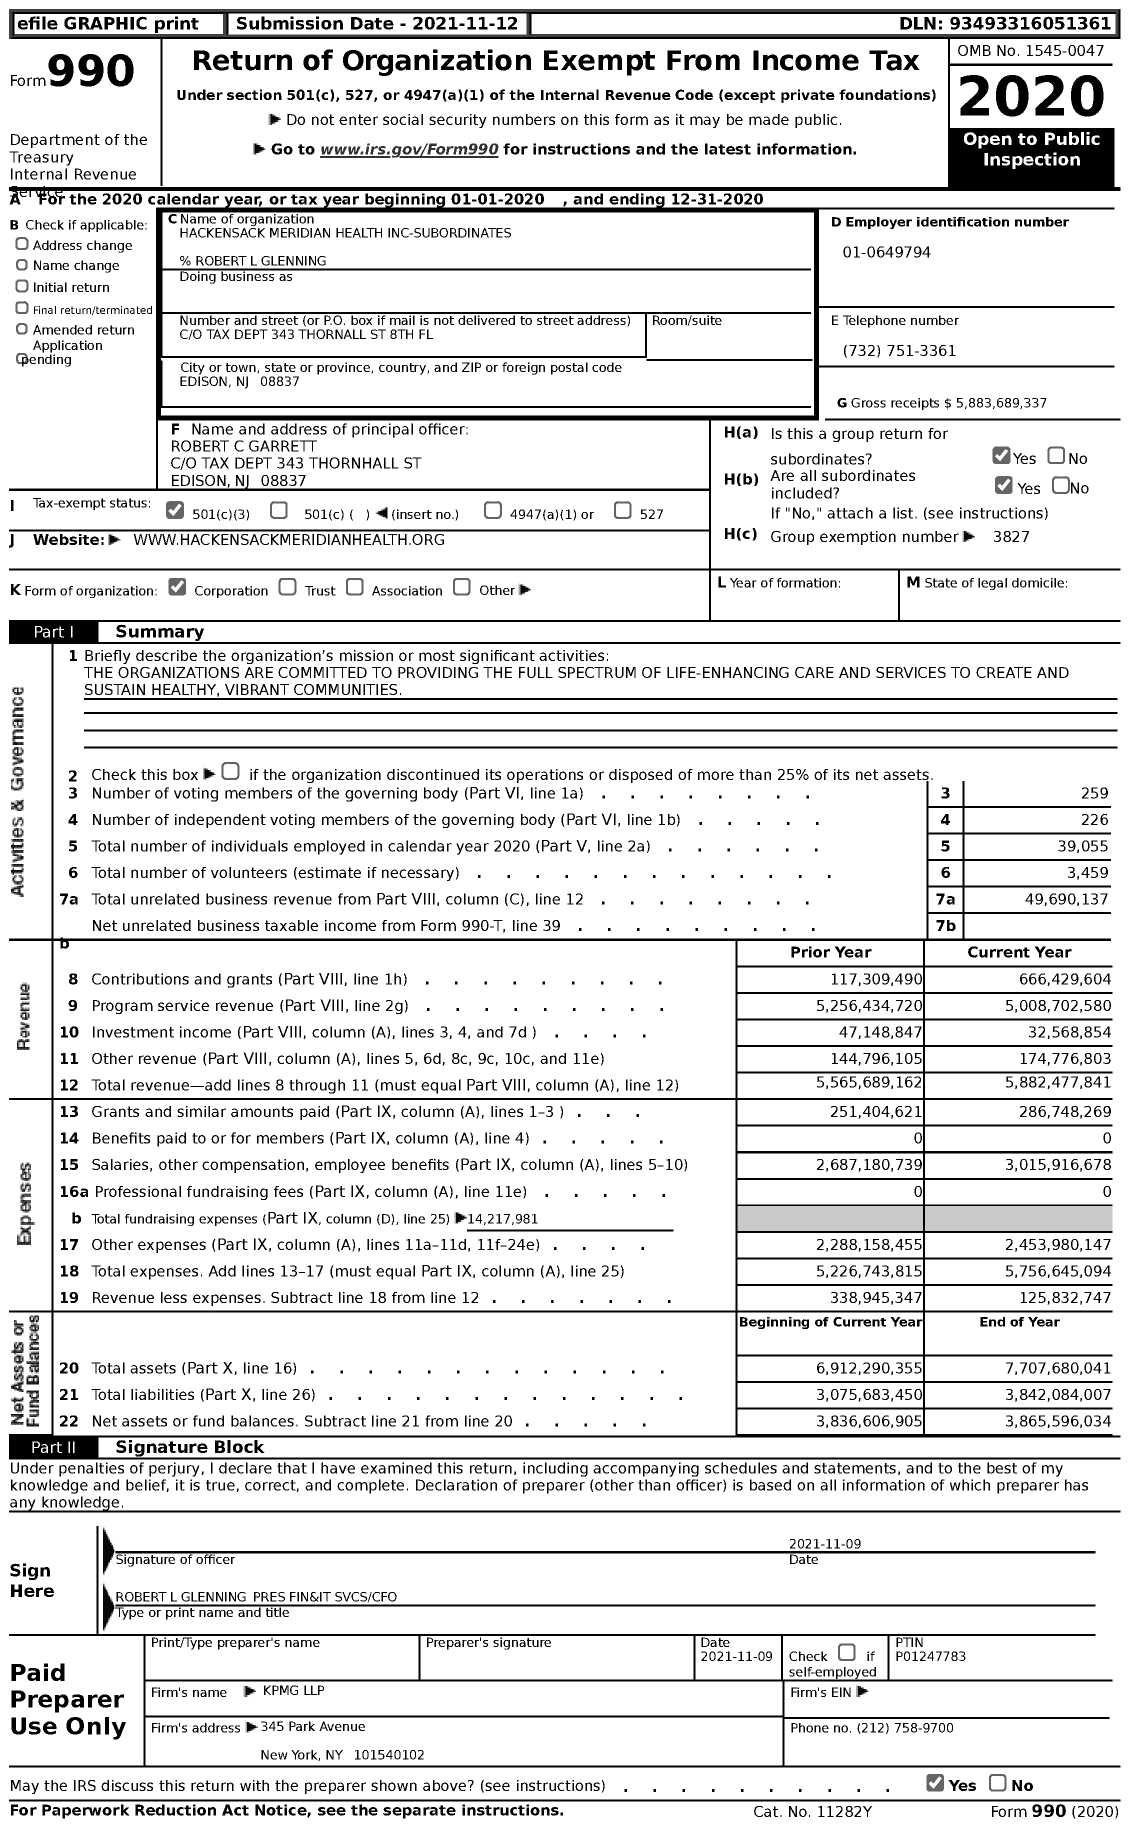 Image of first page of 2020 Form 990 for Hackensack Meridian Health -subordinates (HMH)